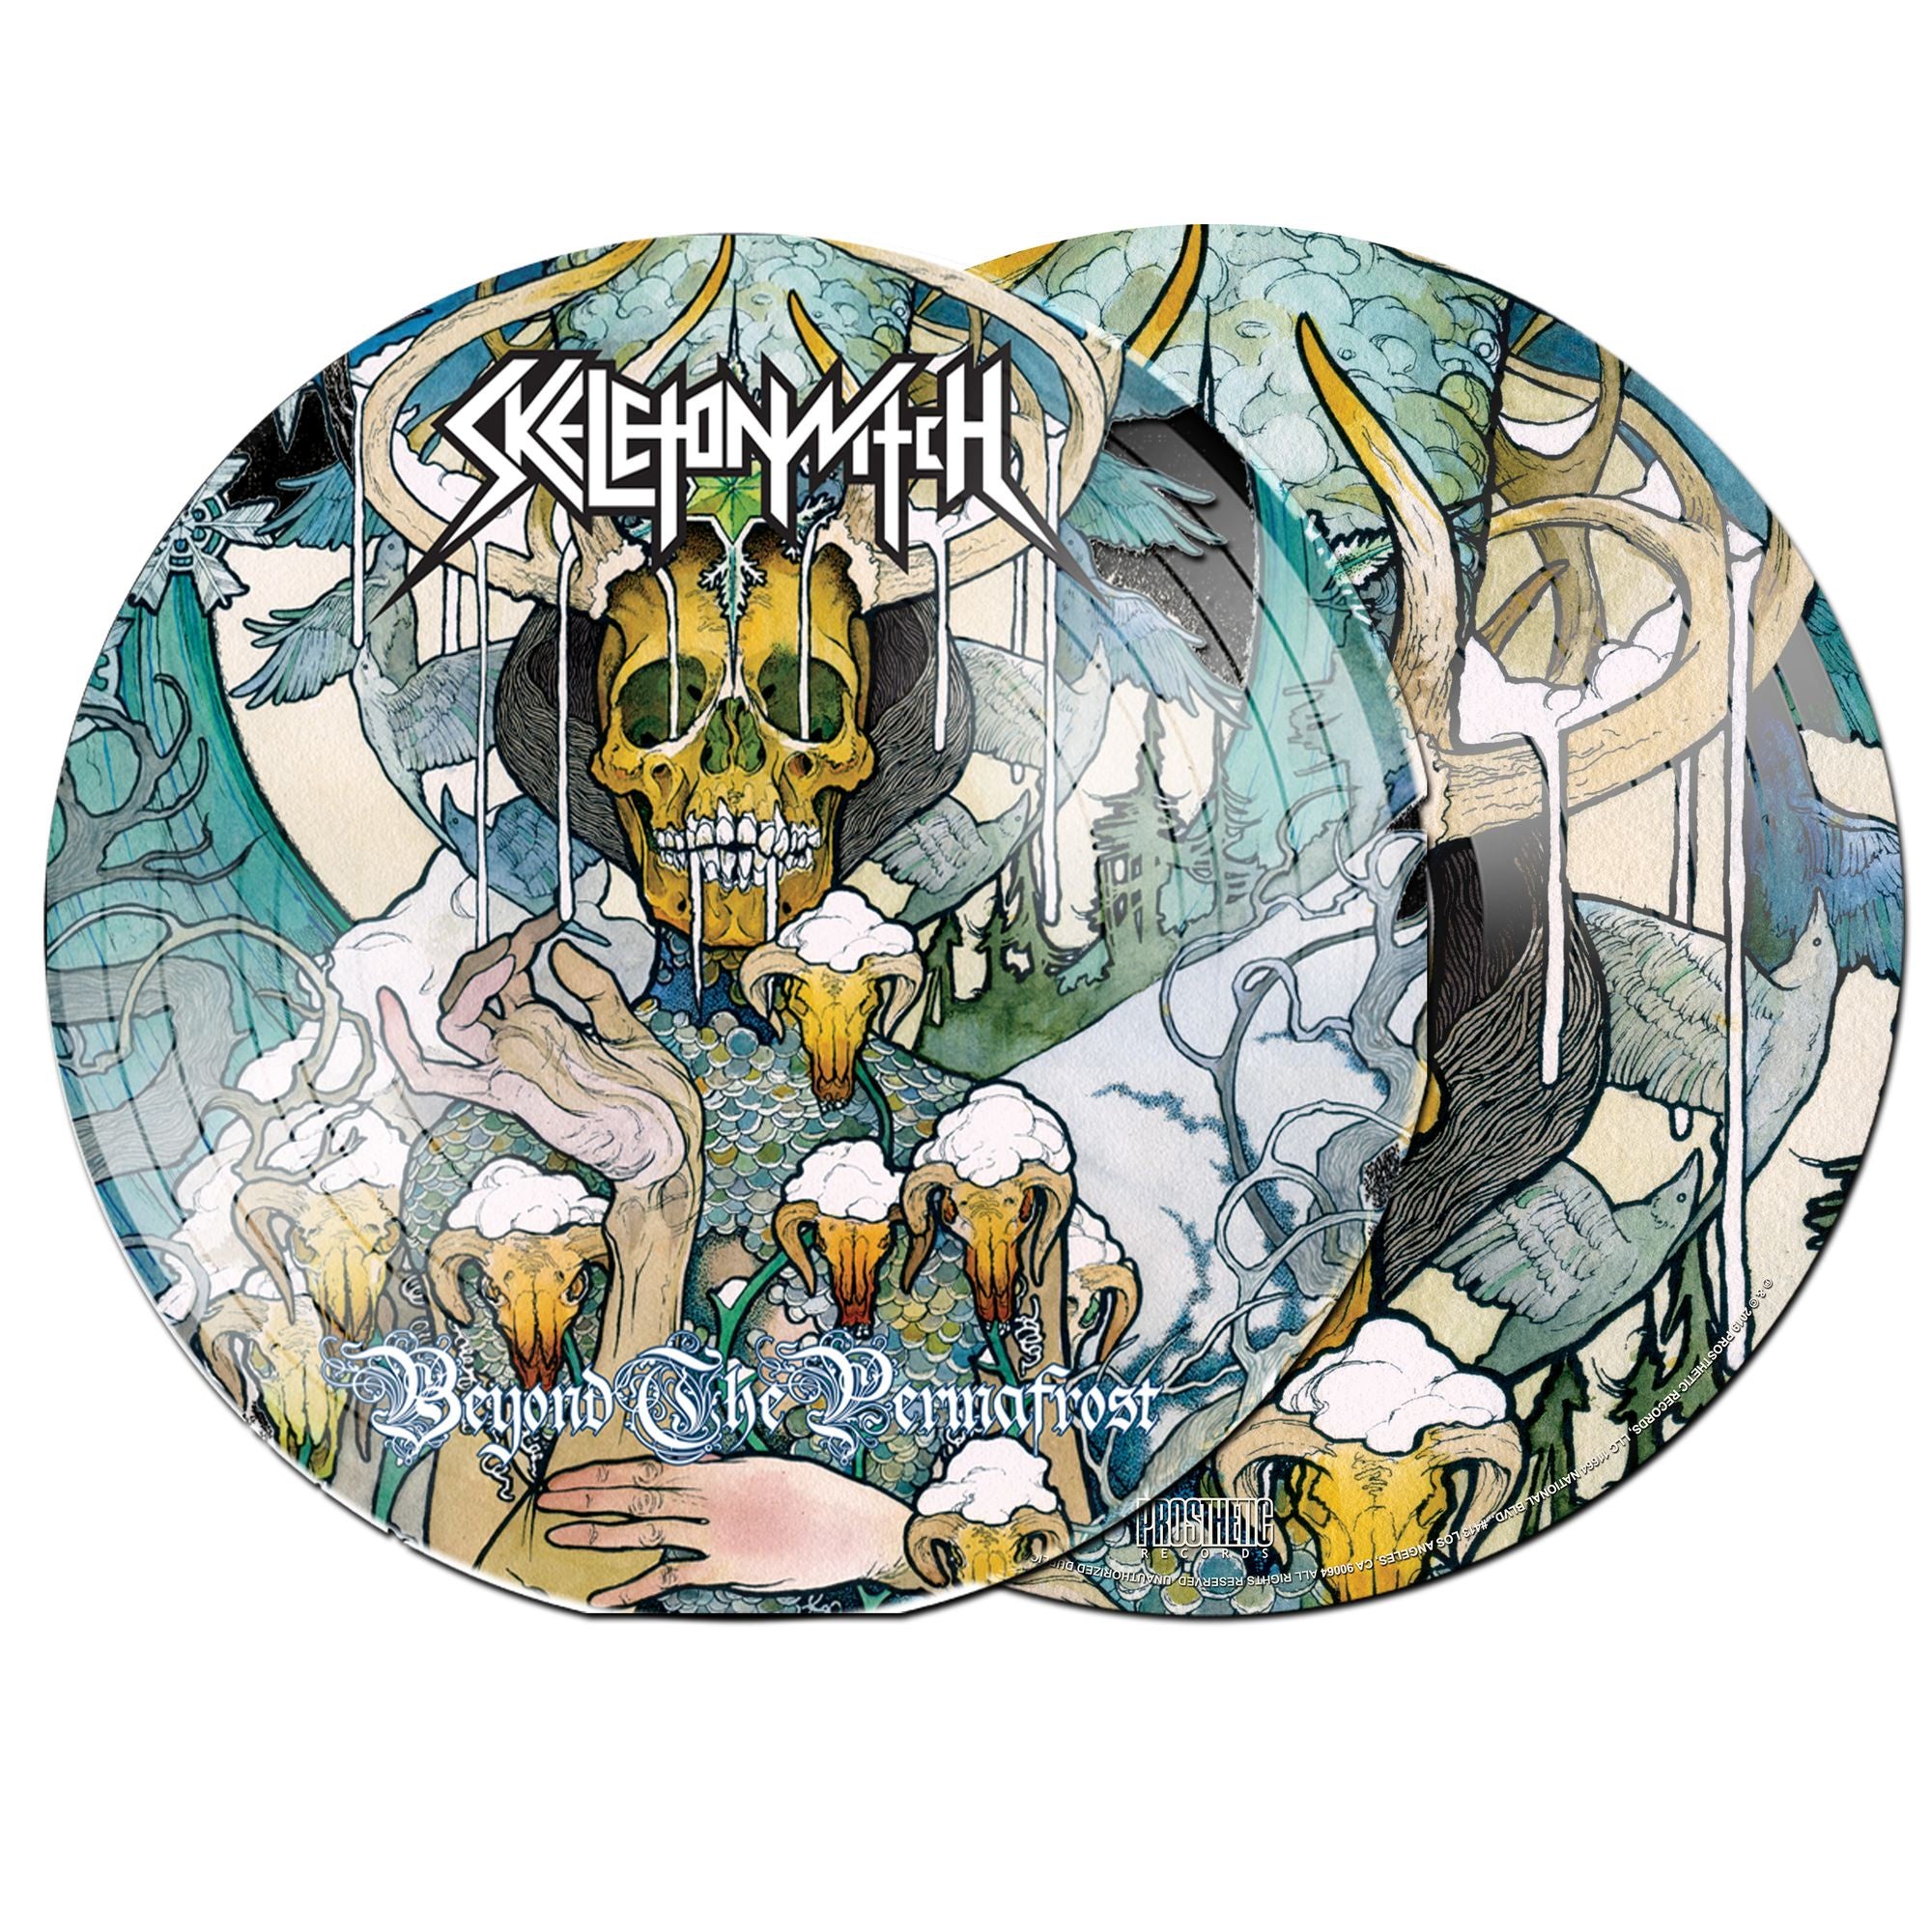 Skeletonwitch - Beyond the Permafrost - New Lp 2019 Prosthetic Picture Disc Reissue (Limited to 300 Worldwide!) - Black Metal / Thrash